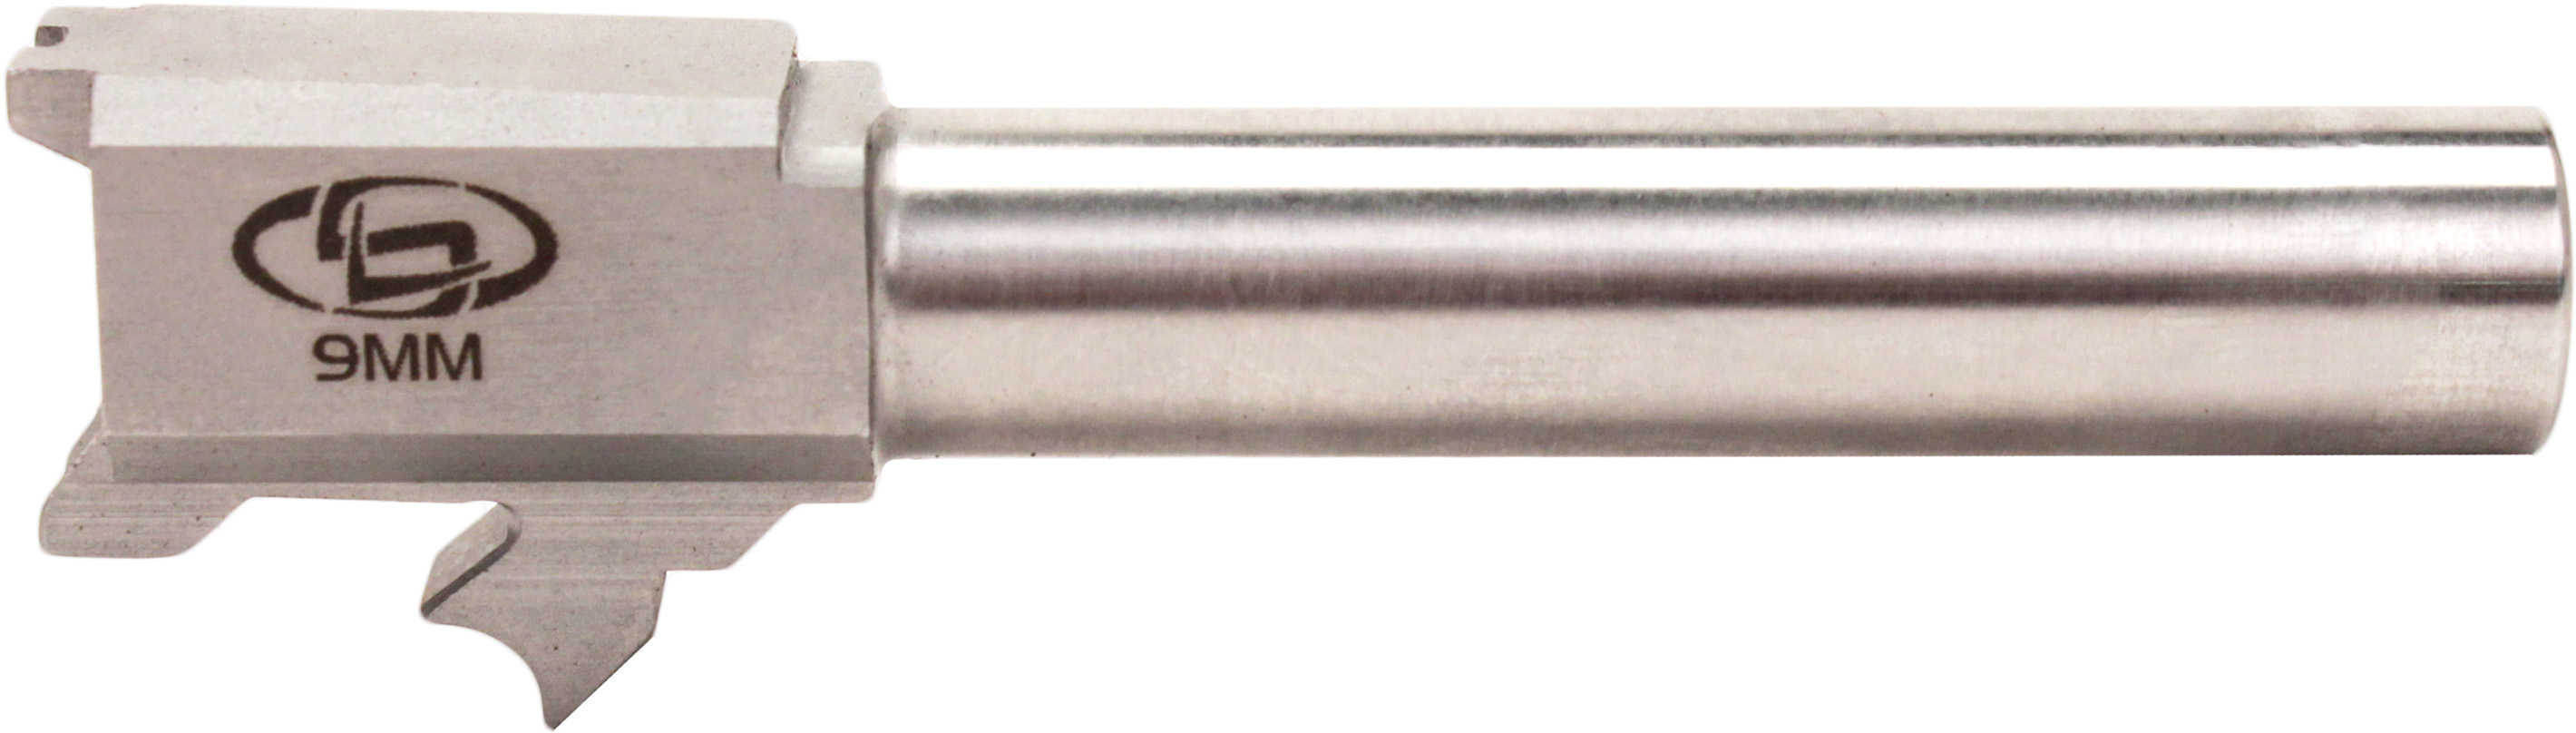 Storm Lake Barrels 9MM 4.05" Fits Springfield XD Stainless Finish Conversion Converts 40 S&W